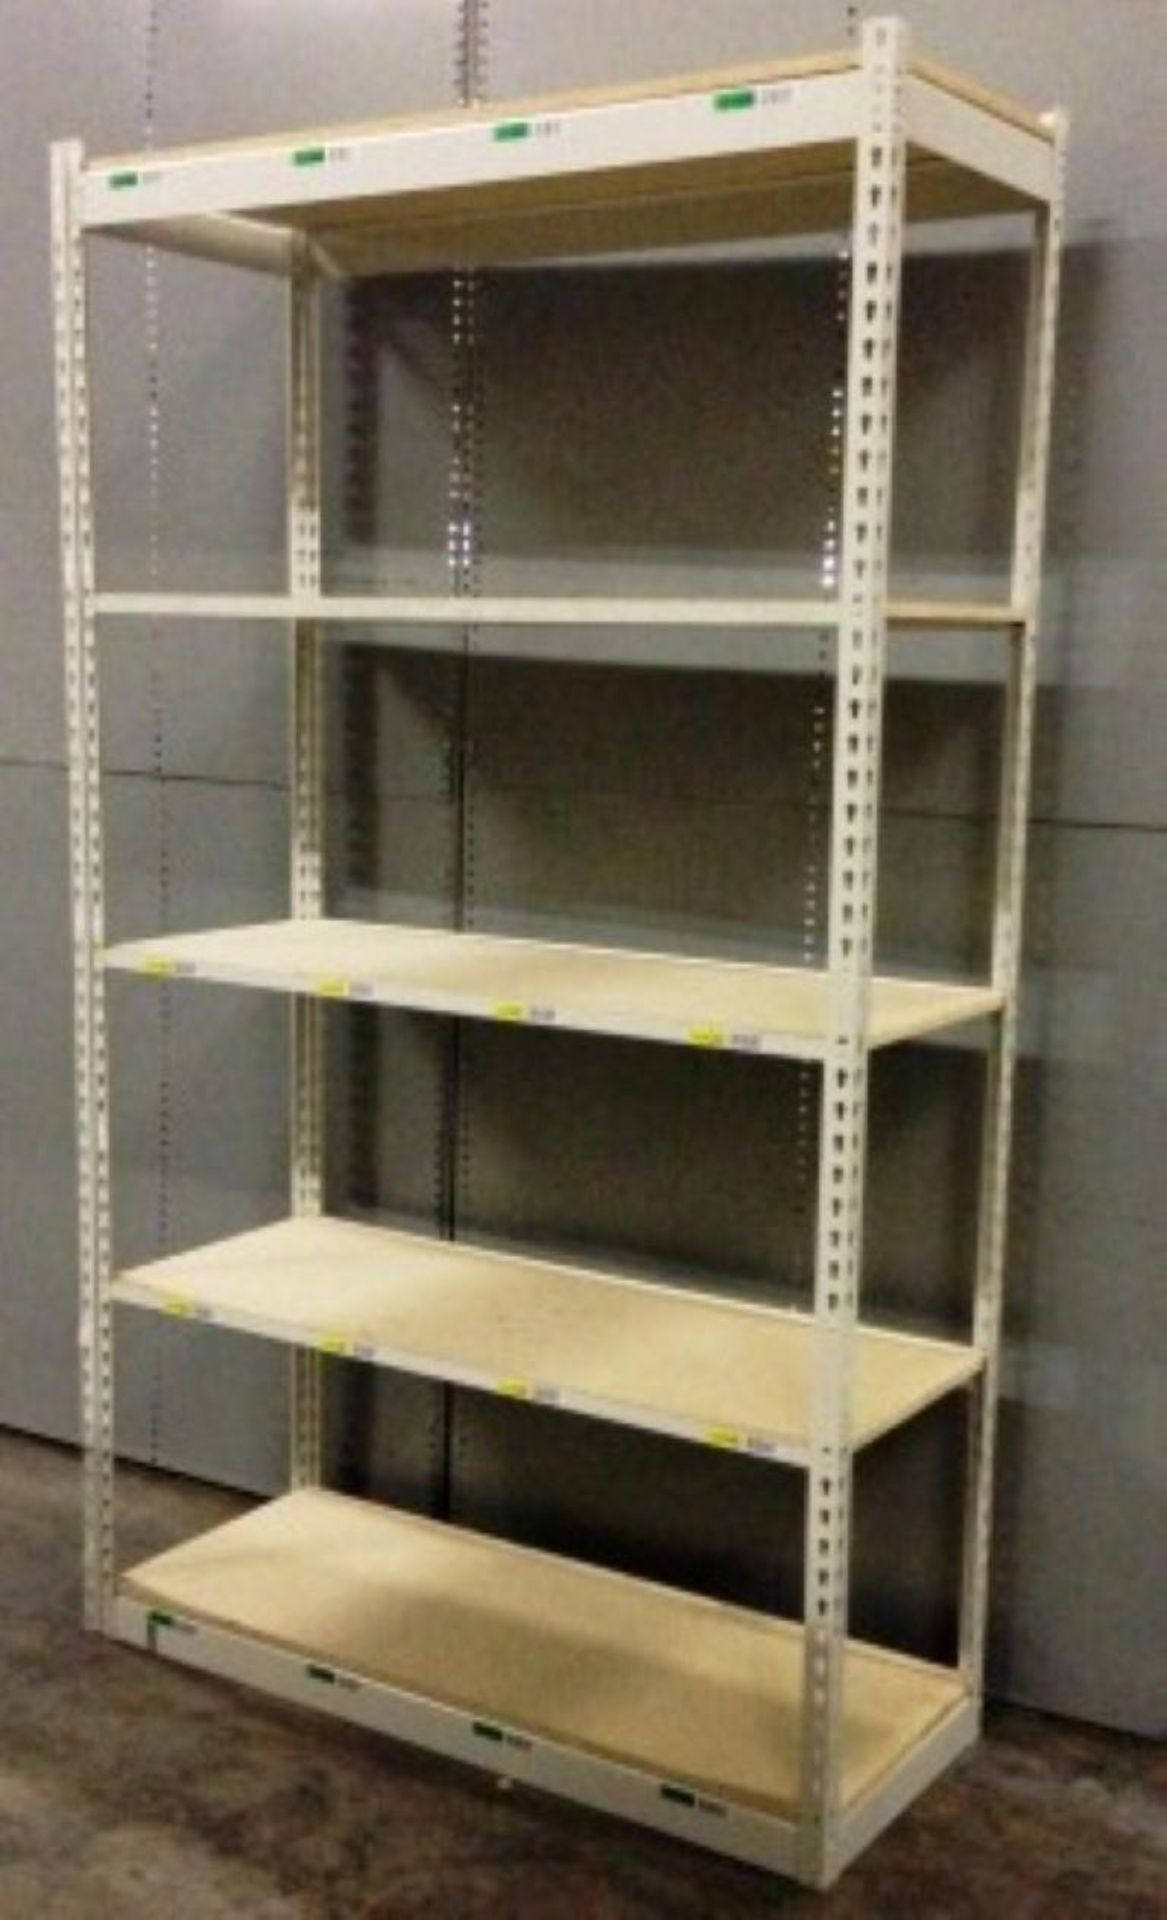 ONE LOT OF 20 SECTIONS OF RIVETIER INDUSTRIAL SHELVING - Image 2 of 2